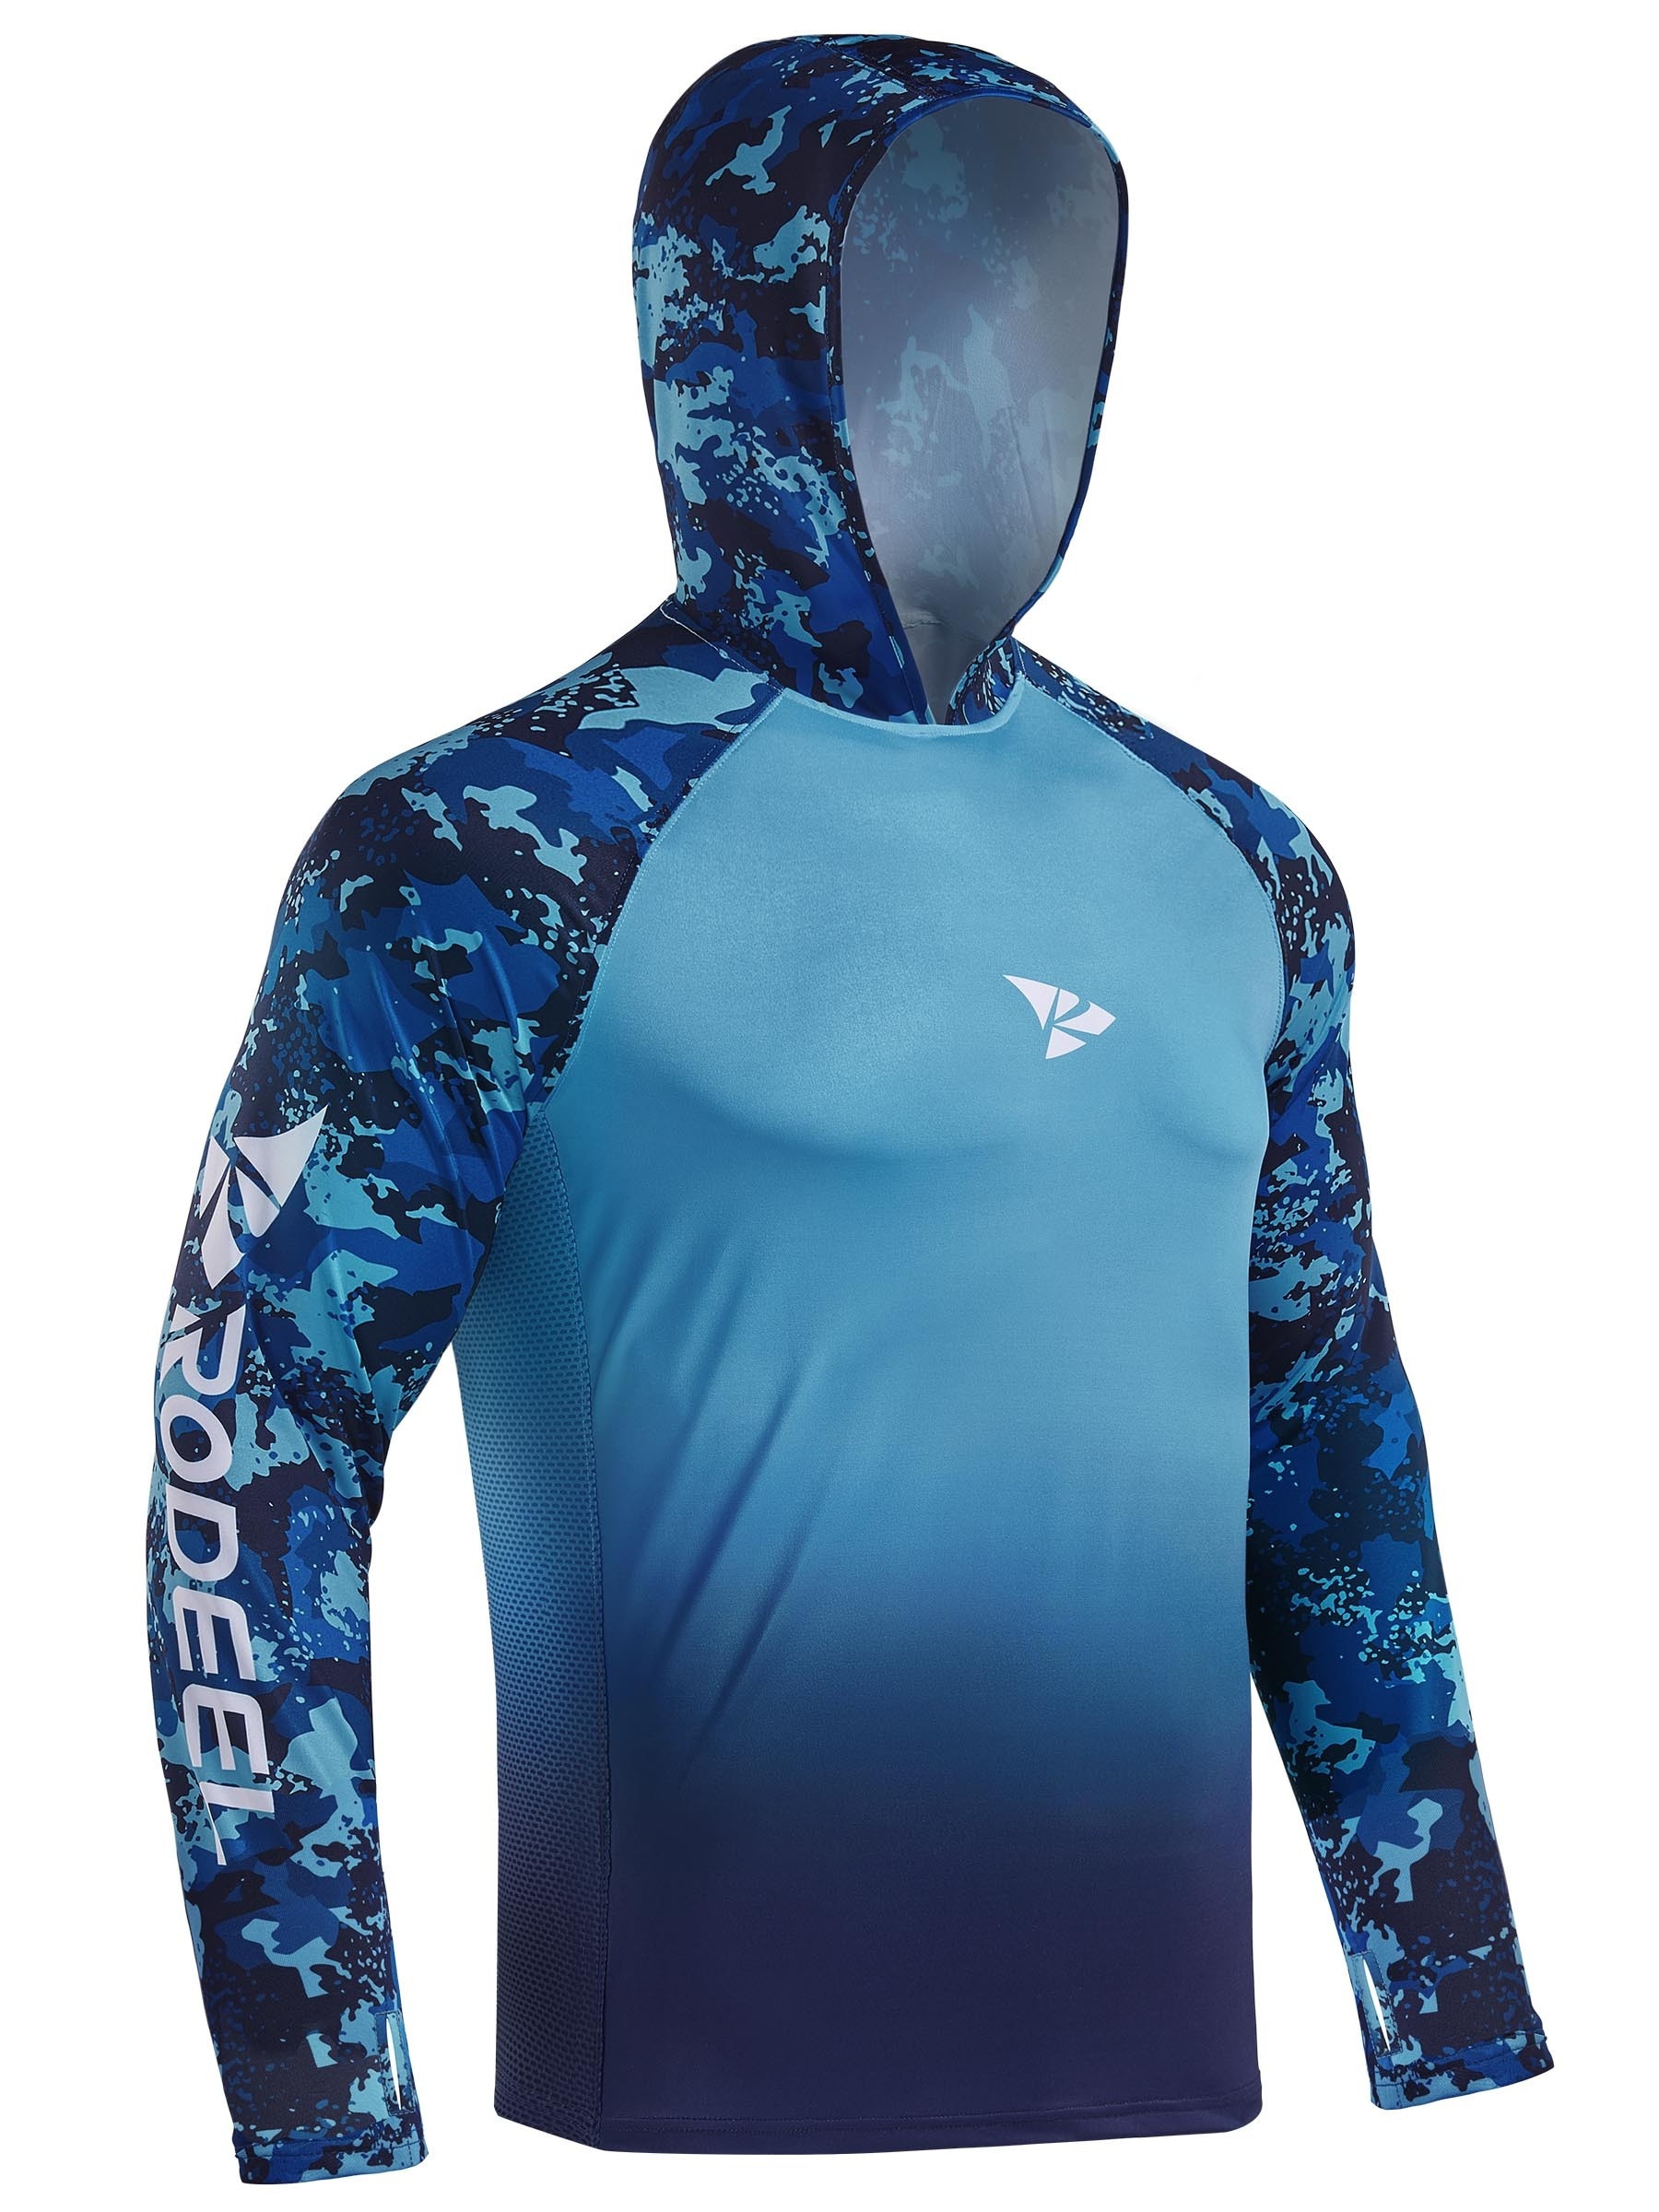 Roadbox Men's Long Sleeve Hoodie - UPF 50+ UV Protection Peformance  Thumbholes Hooded Shirts with Face Mask for Fishing Hiking Workout